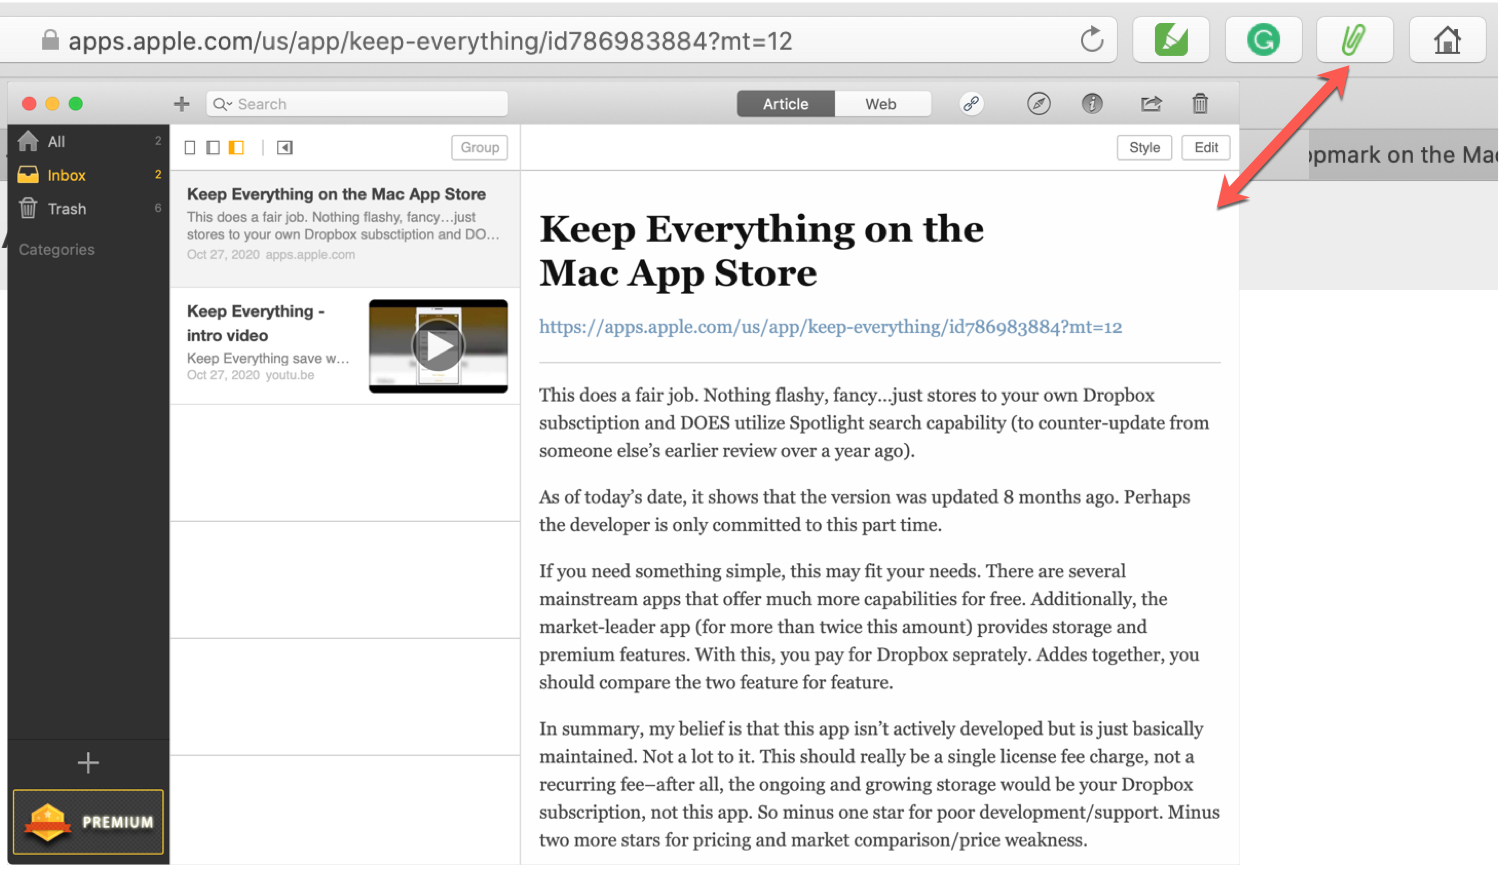 Keep Everything Safari Extension for Notes